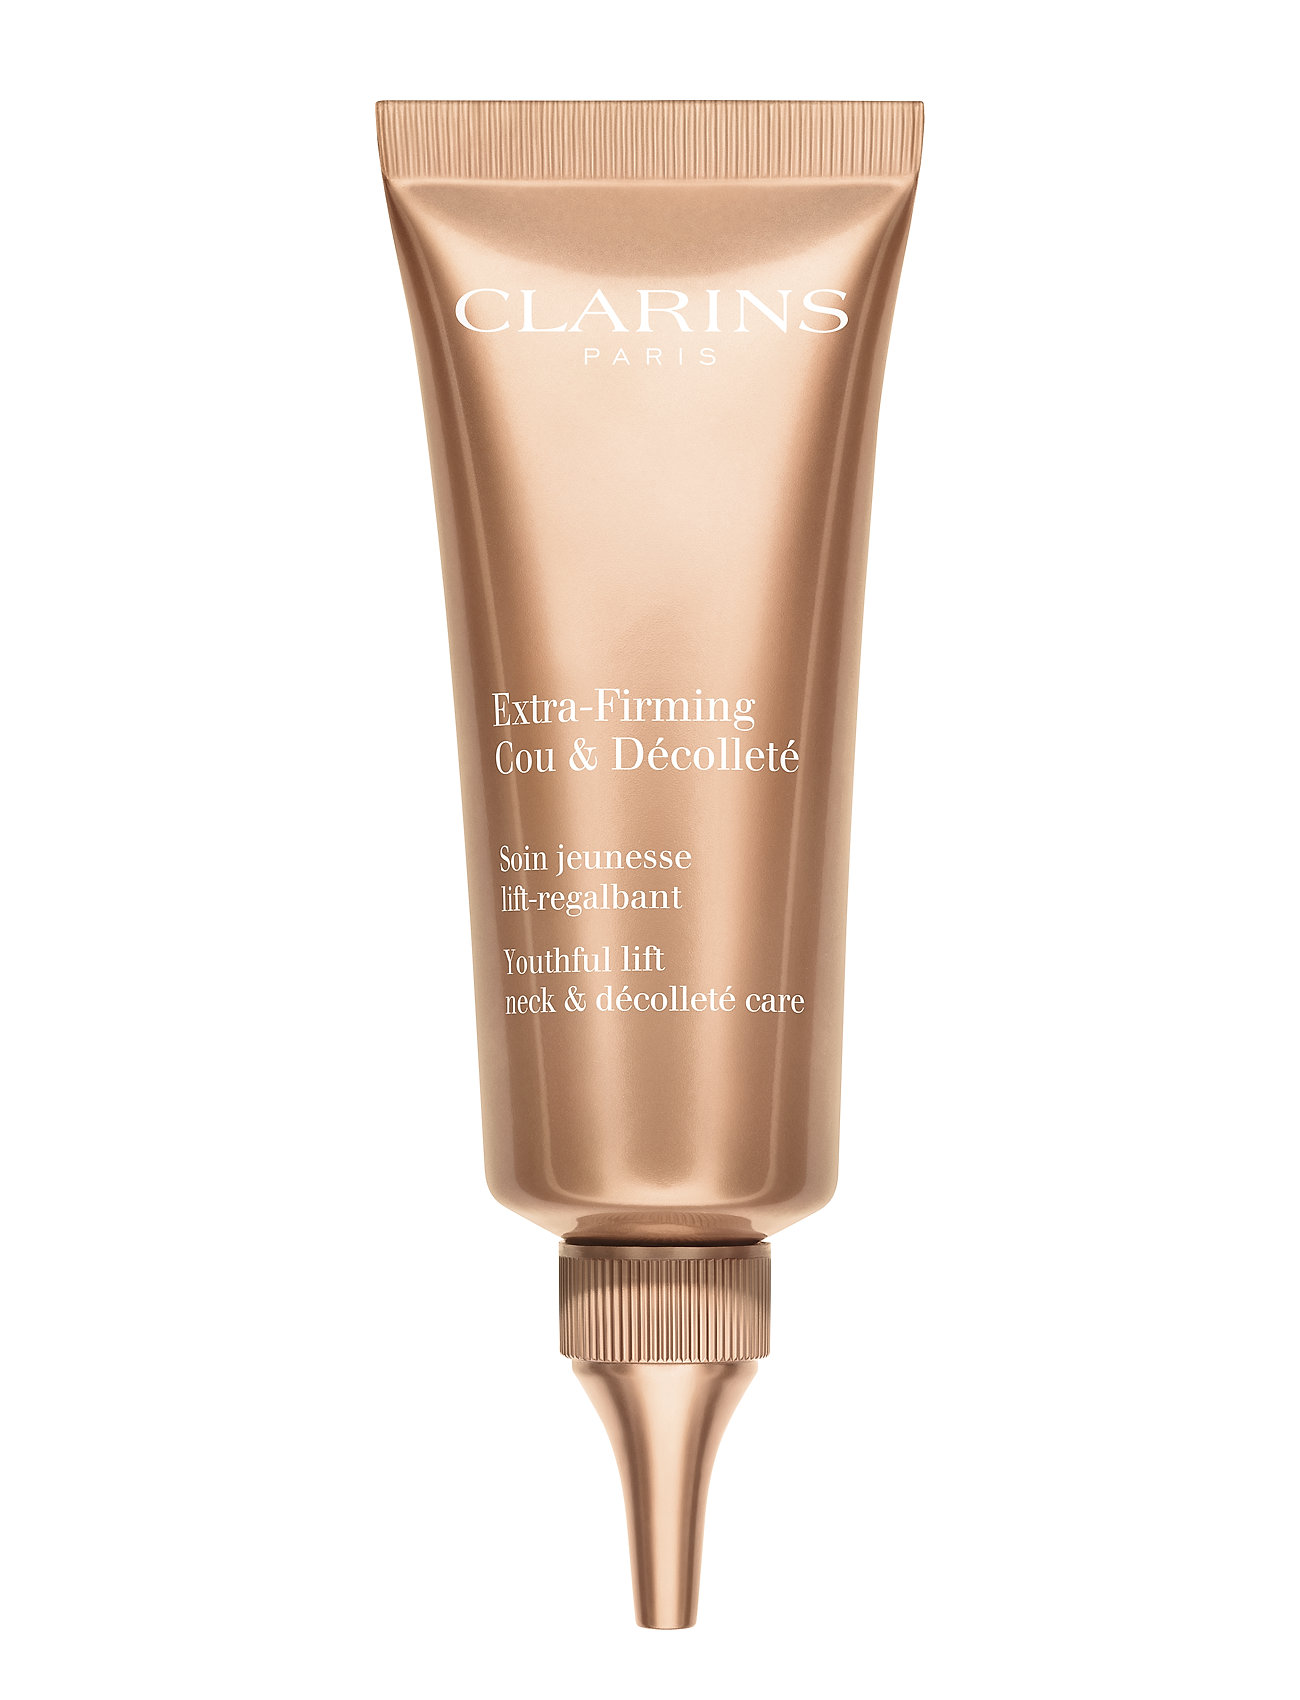 Extra-Firming Neck Cream Beauty WOMEN Skin Care Face Day Creams Clarins